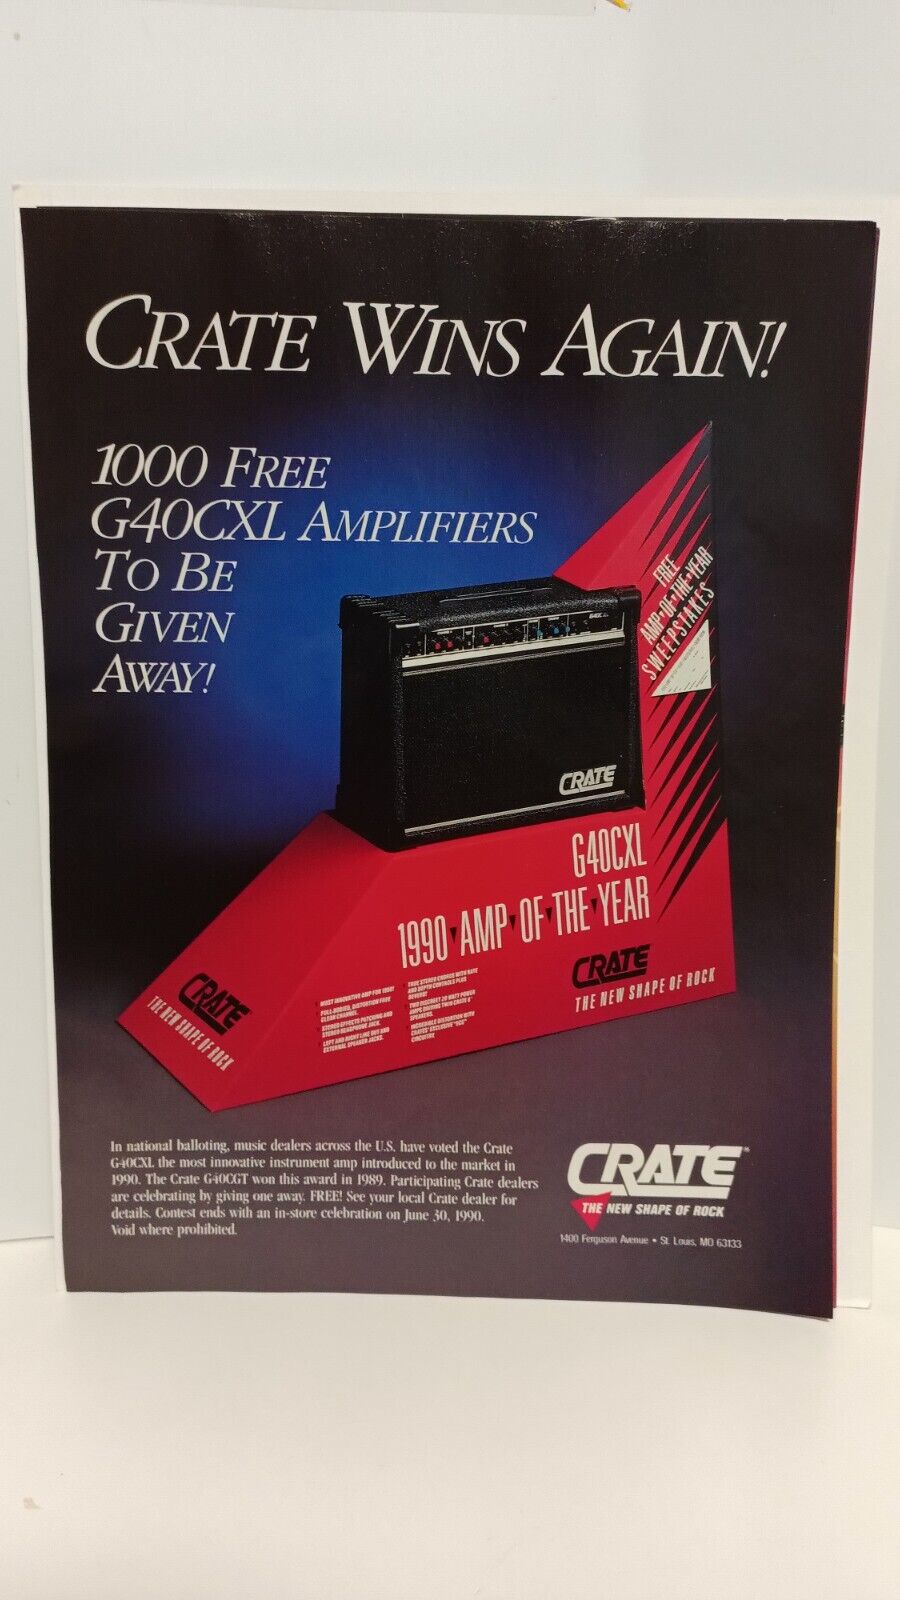 CRATE GUITAR AMPLIFIERS G40CXL  - AMP OF THE YEAR  1990    11X8 - PRINT AD. n1